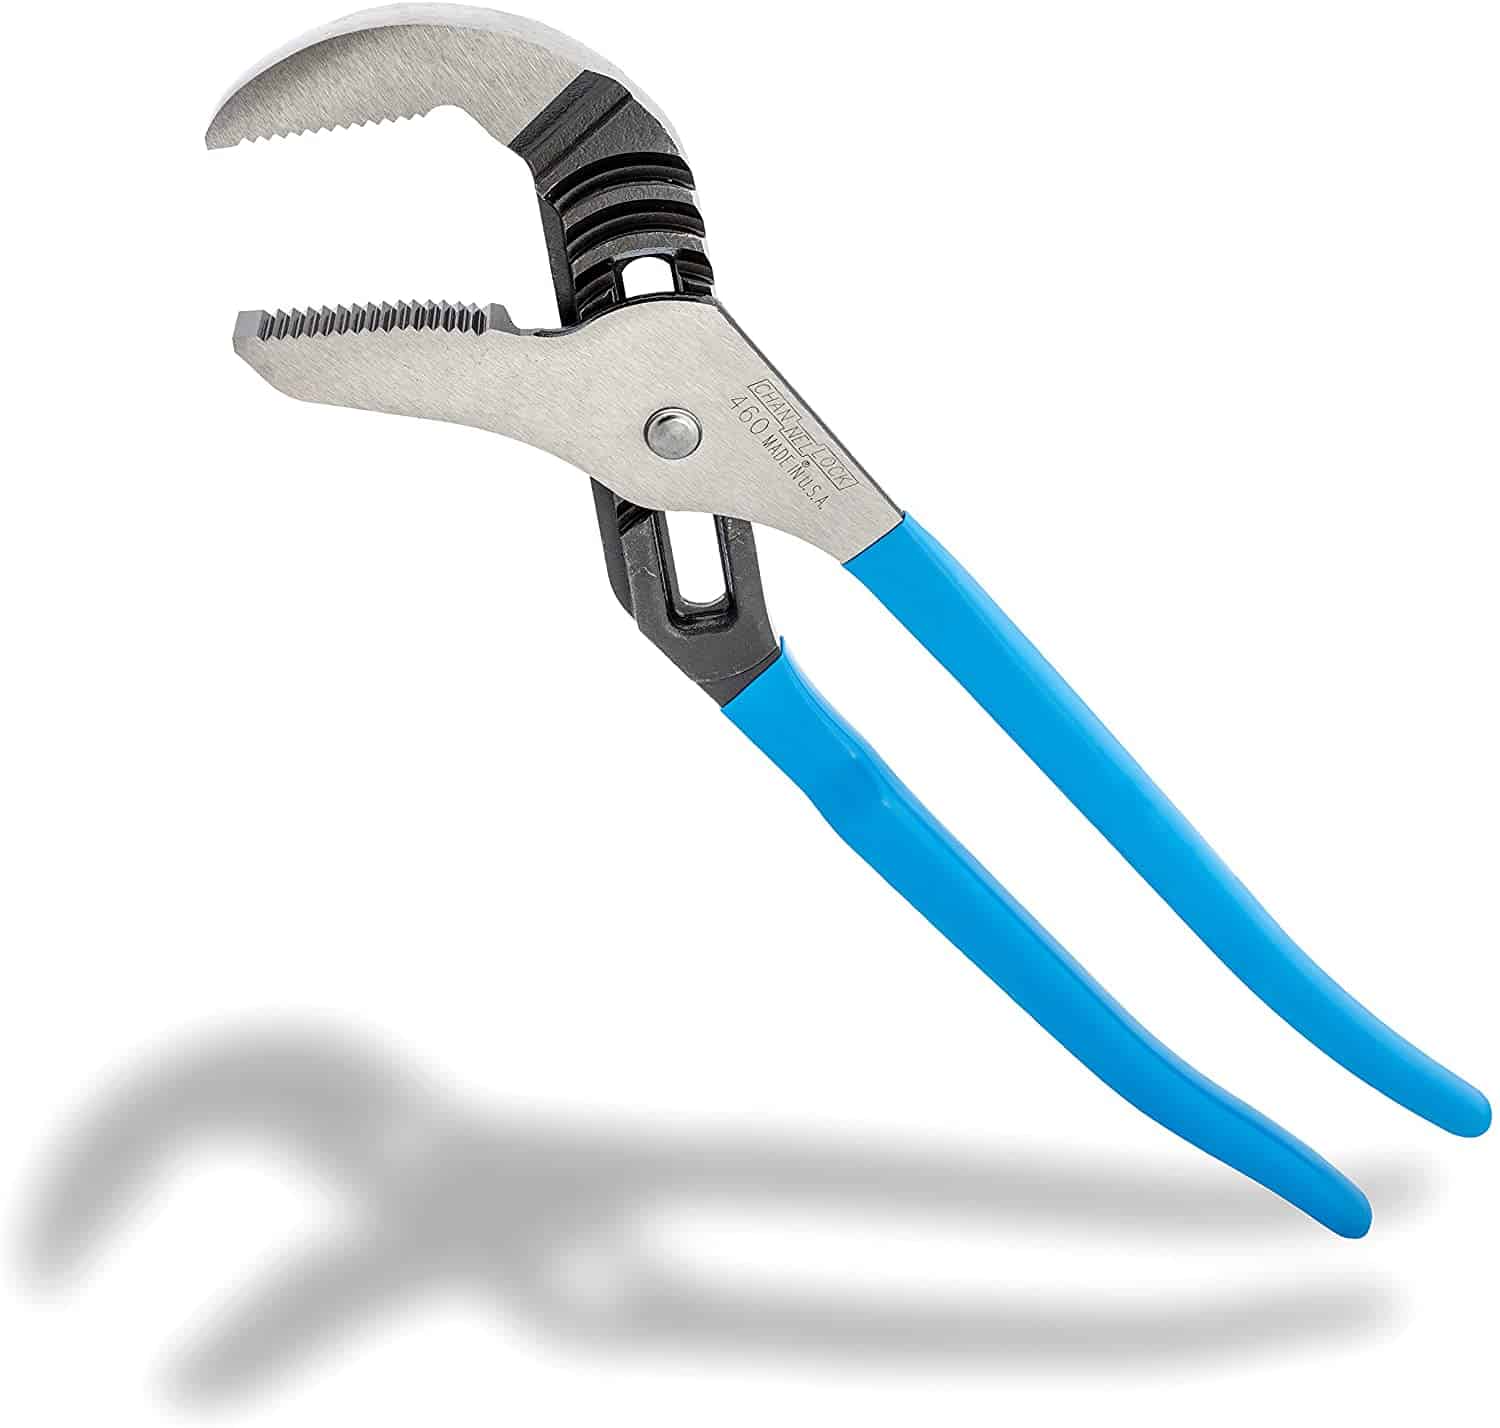 Overall best groove joint pliers: Channellock 460